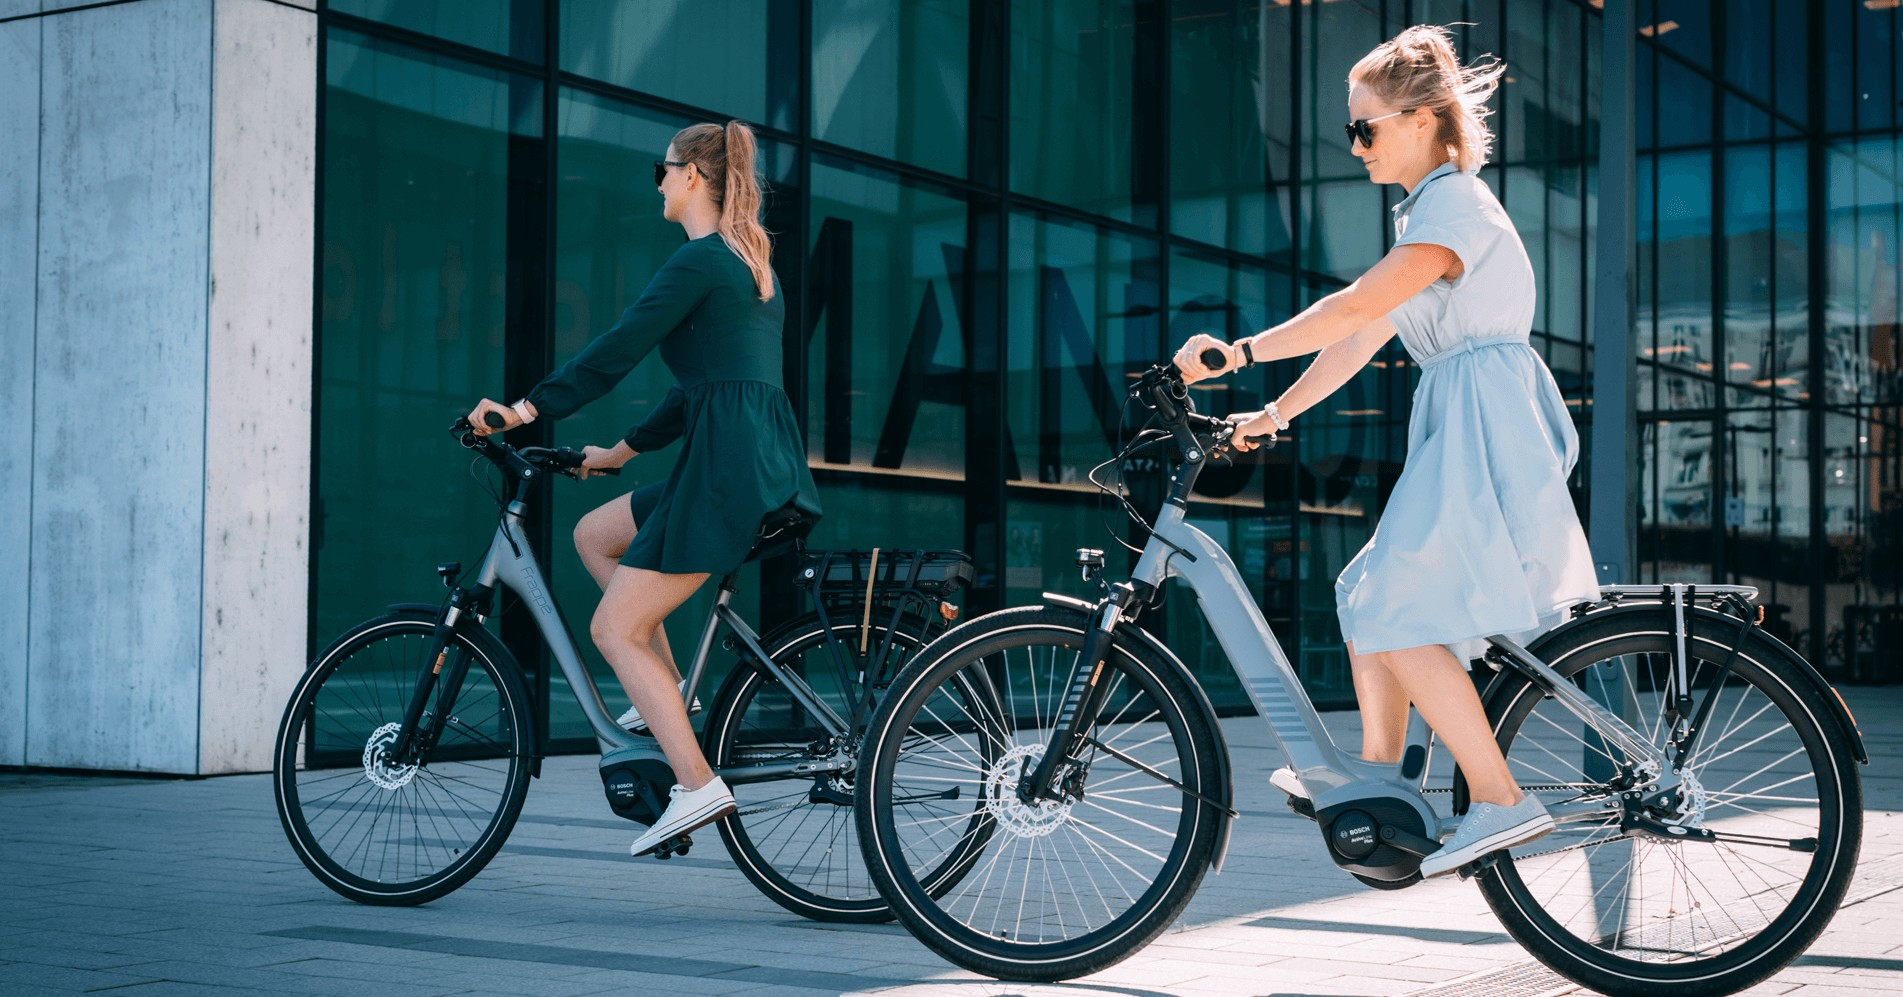 Bicycle Leasing for Employees